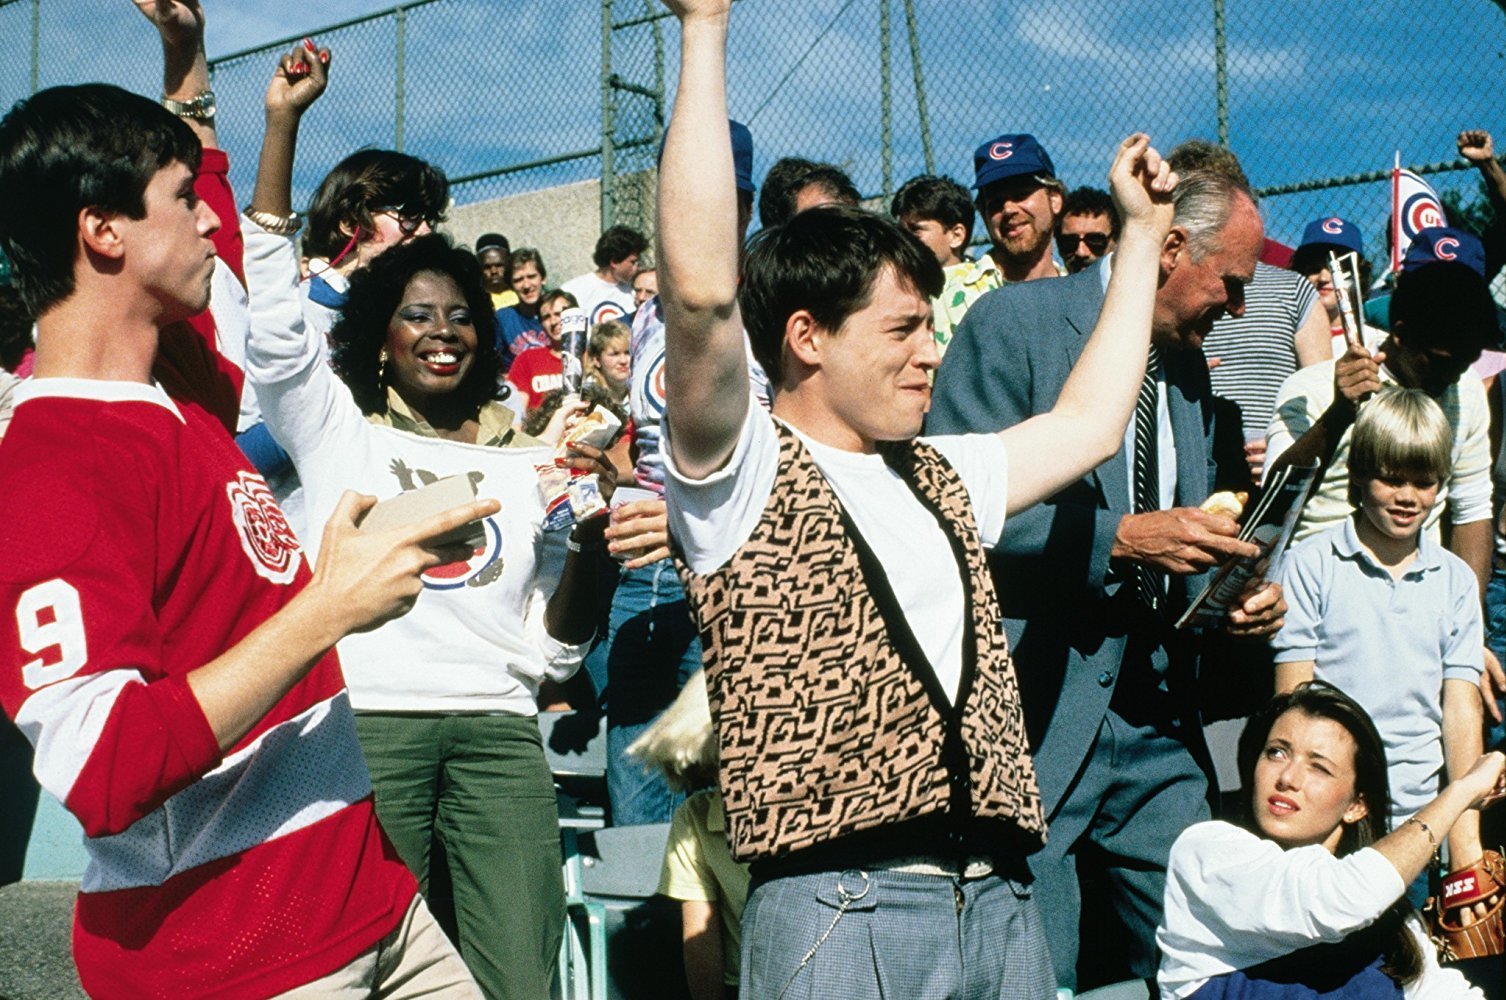 Could 'Ferris Bueller's Day Off' in Chicago really be done? We found out. -  The Washington Post